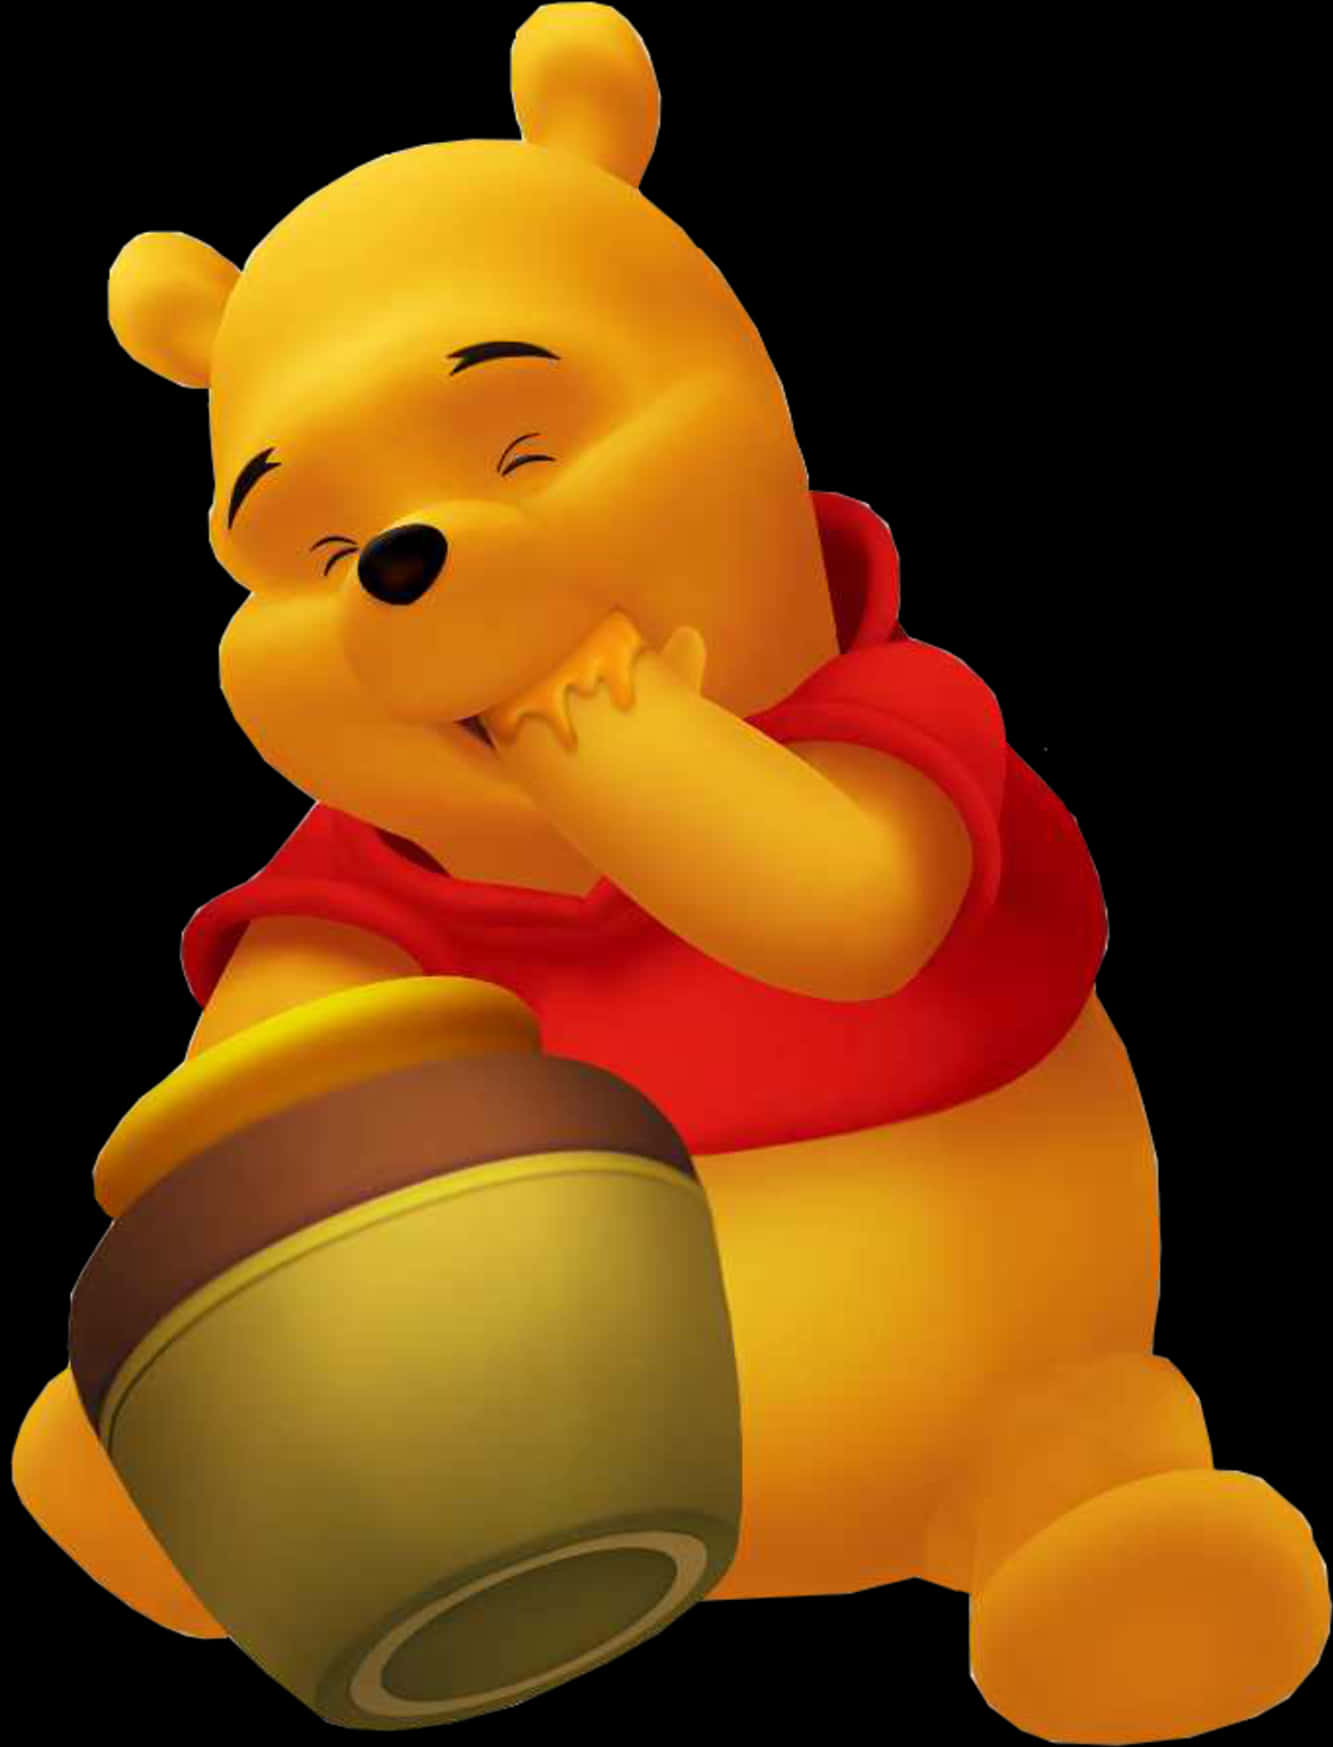 Winnie The Pooh Smiling With Honey Pot PNG